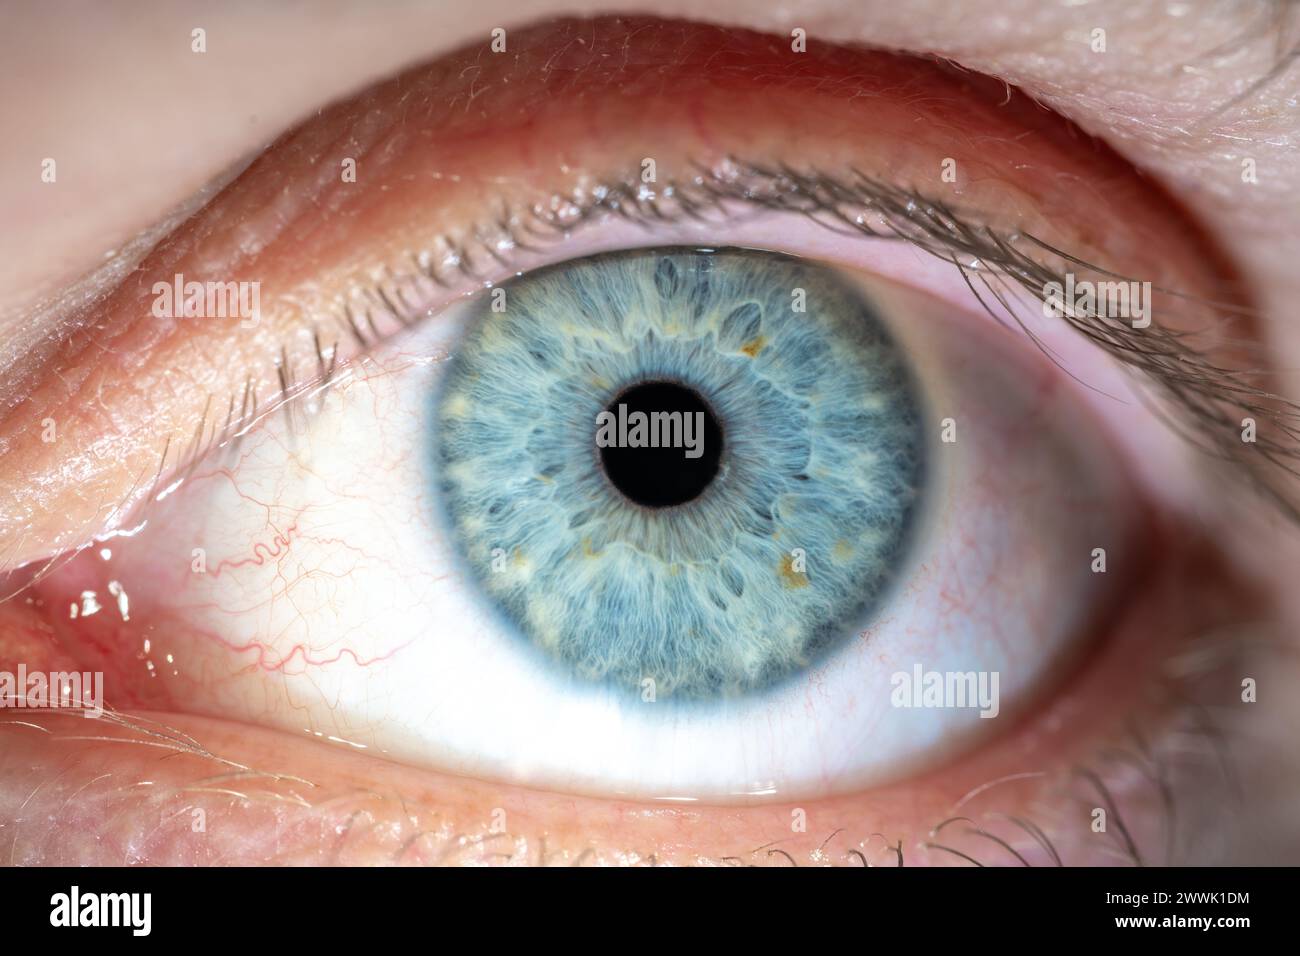 Description: Male Blue Colored Eye with Yellow Pigment Spots and Lashes. Pupil Opened. Close Up. Structural Anatomy. Human Iris Macro Detail. Stock Photo